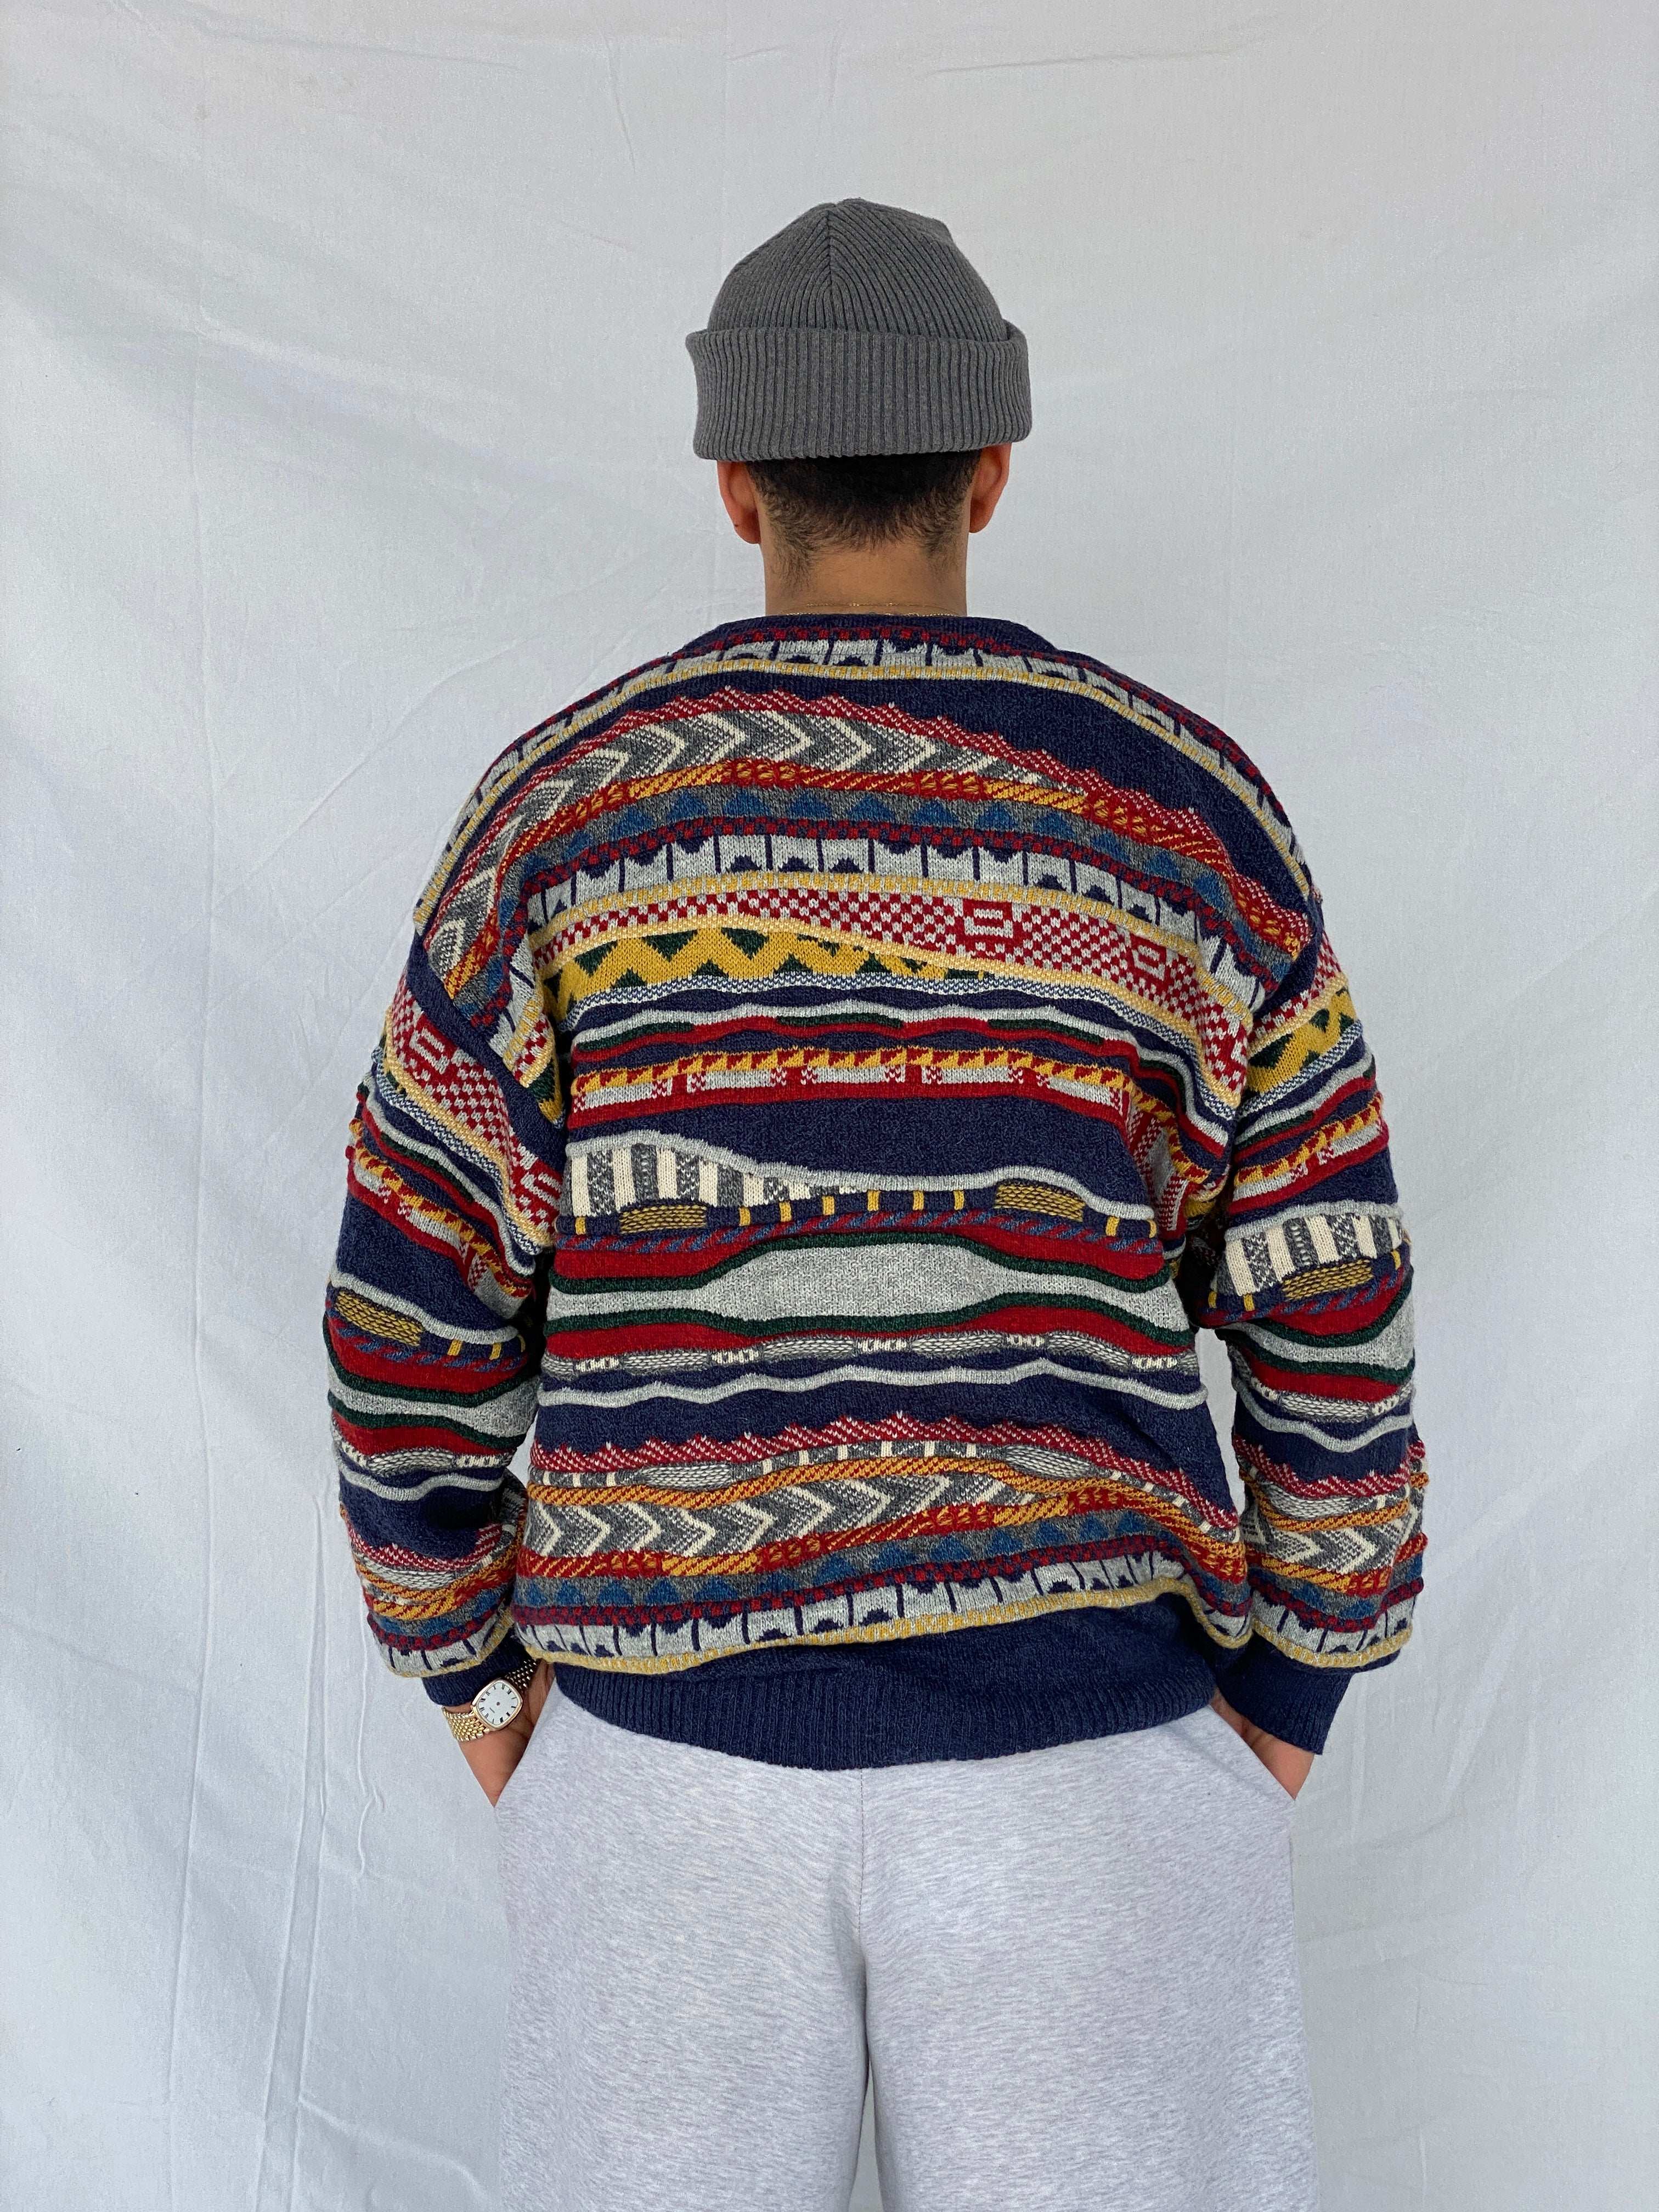 Vintage State of Art Coogi-Style Knitted Multi-Colored Cardigan Sweater - Size XL - Balagan Vintage Cardigan 90s, Abdullah, cardigan, knitted cardigan, knitted sweater, oversized sweater, vintage sweater, winter